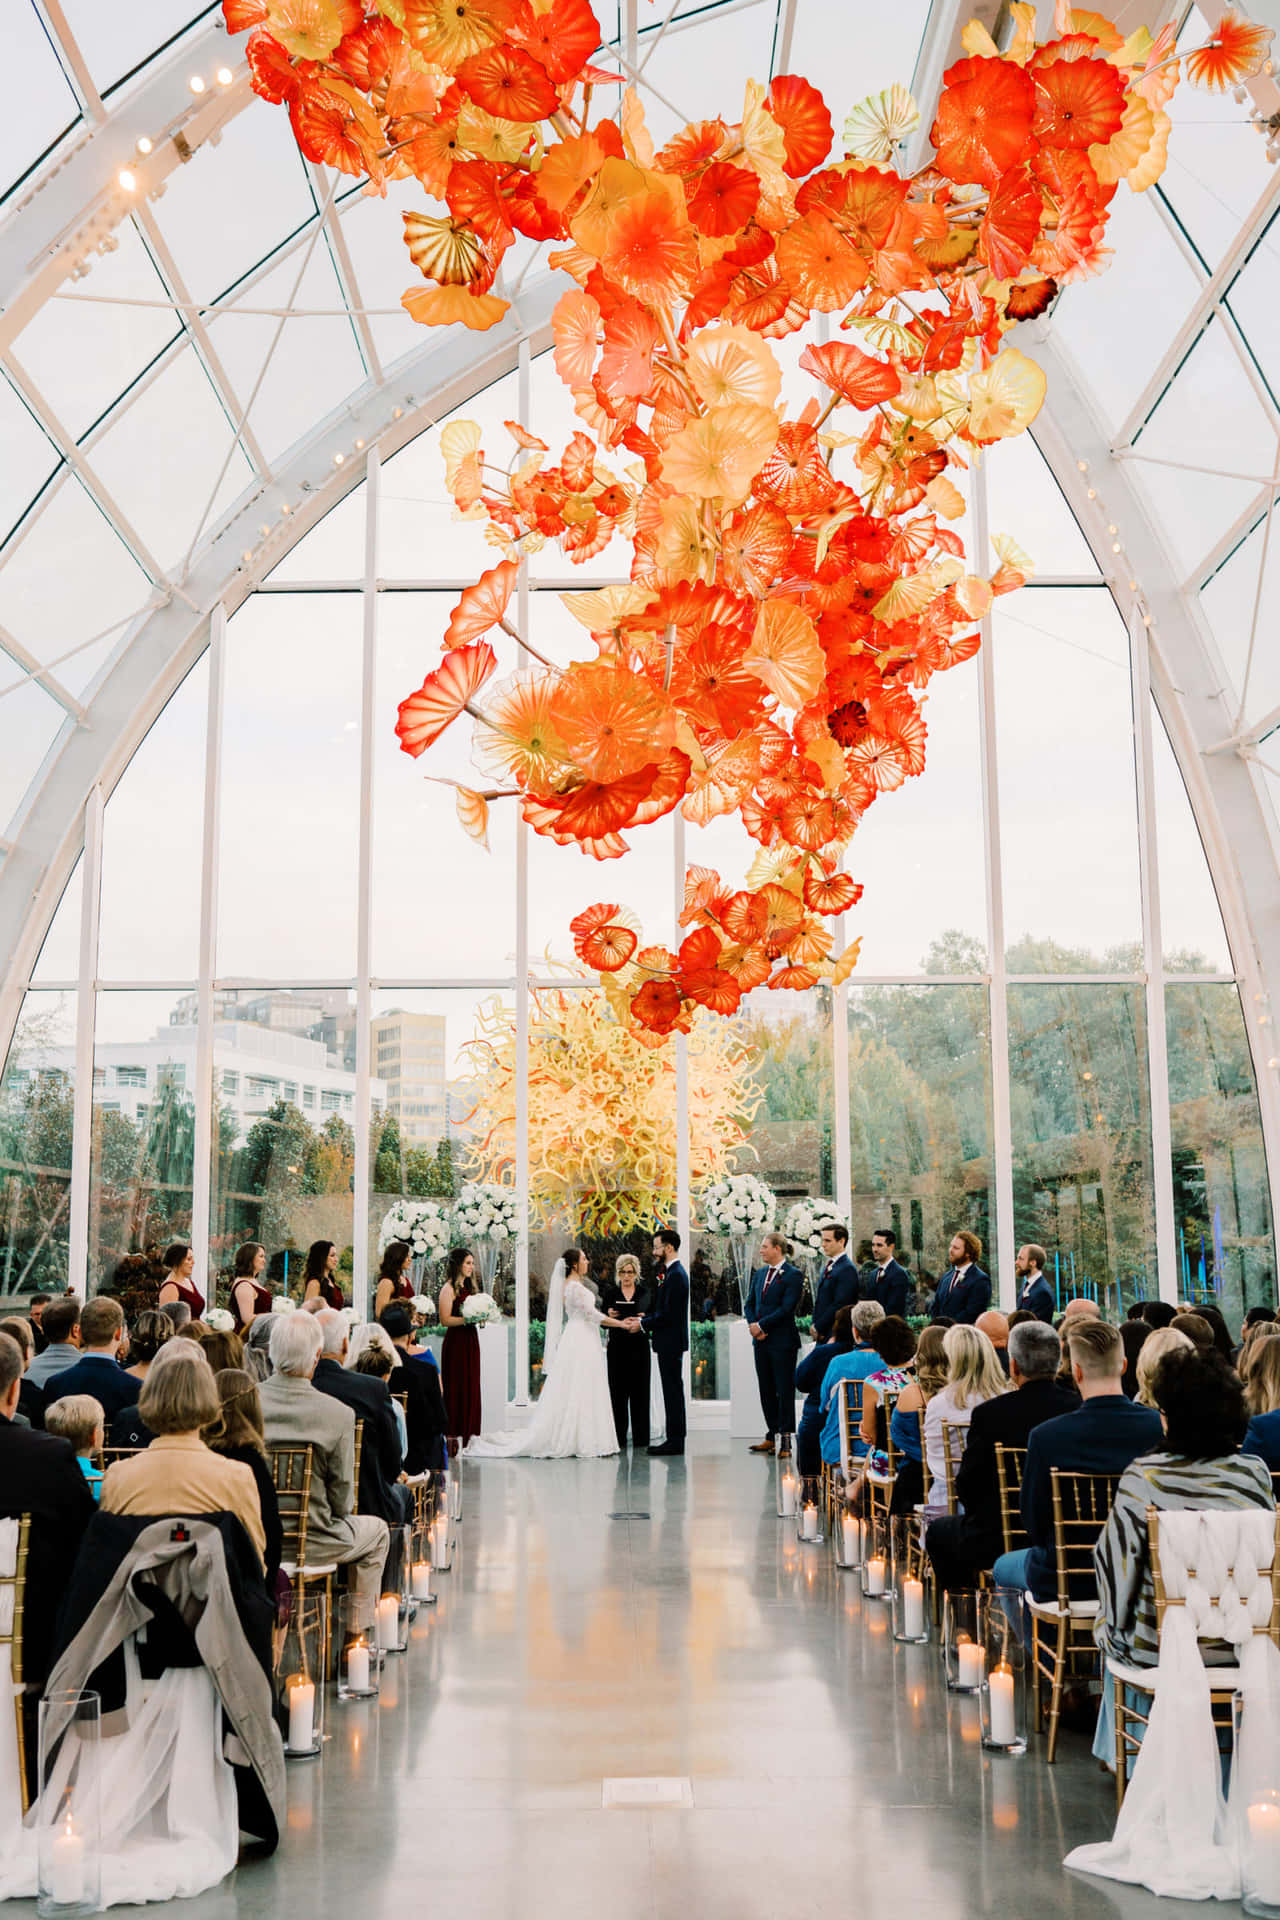 Chihuly Glass Art Wedding Ceremony Wallpaper